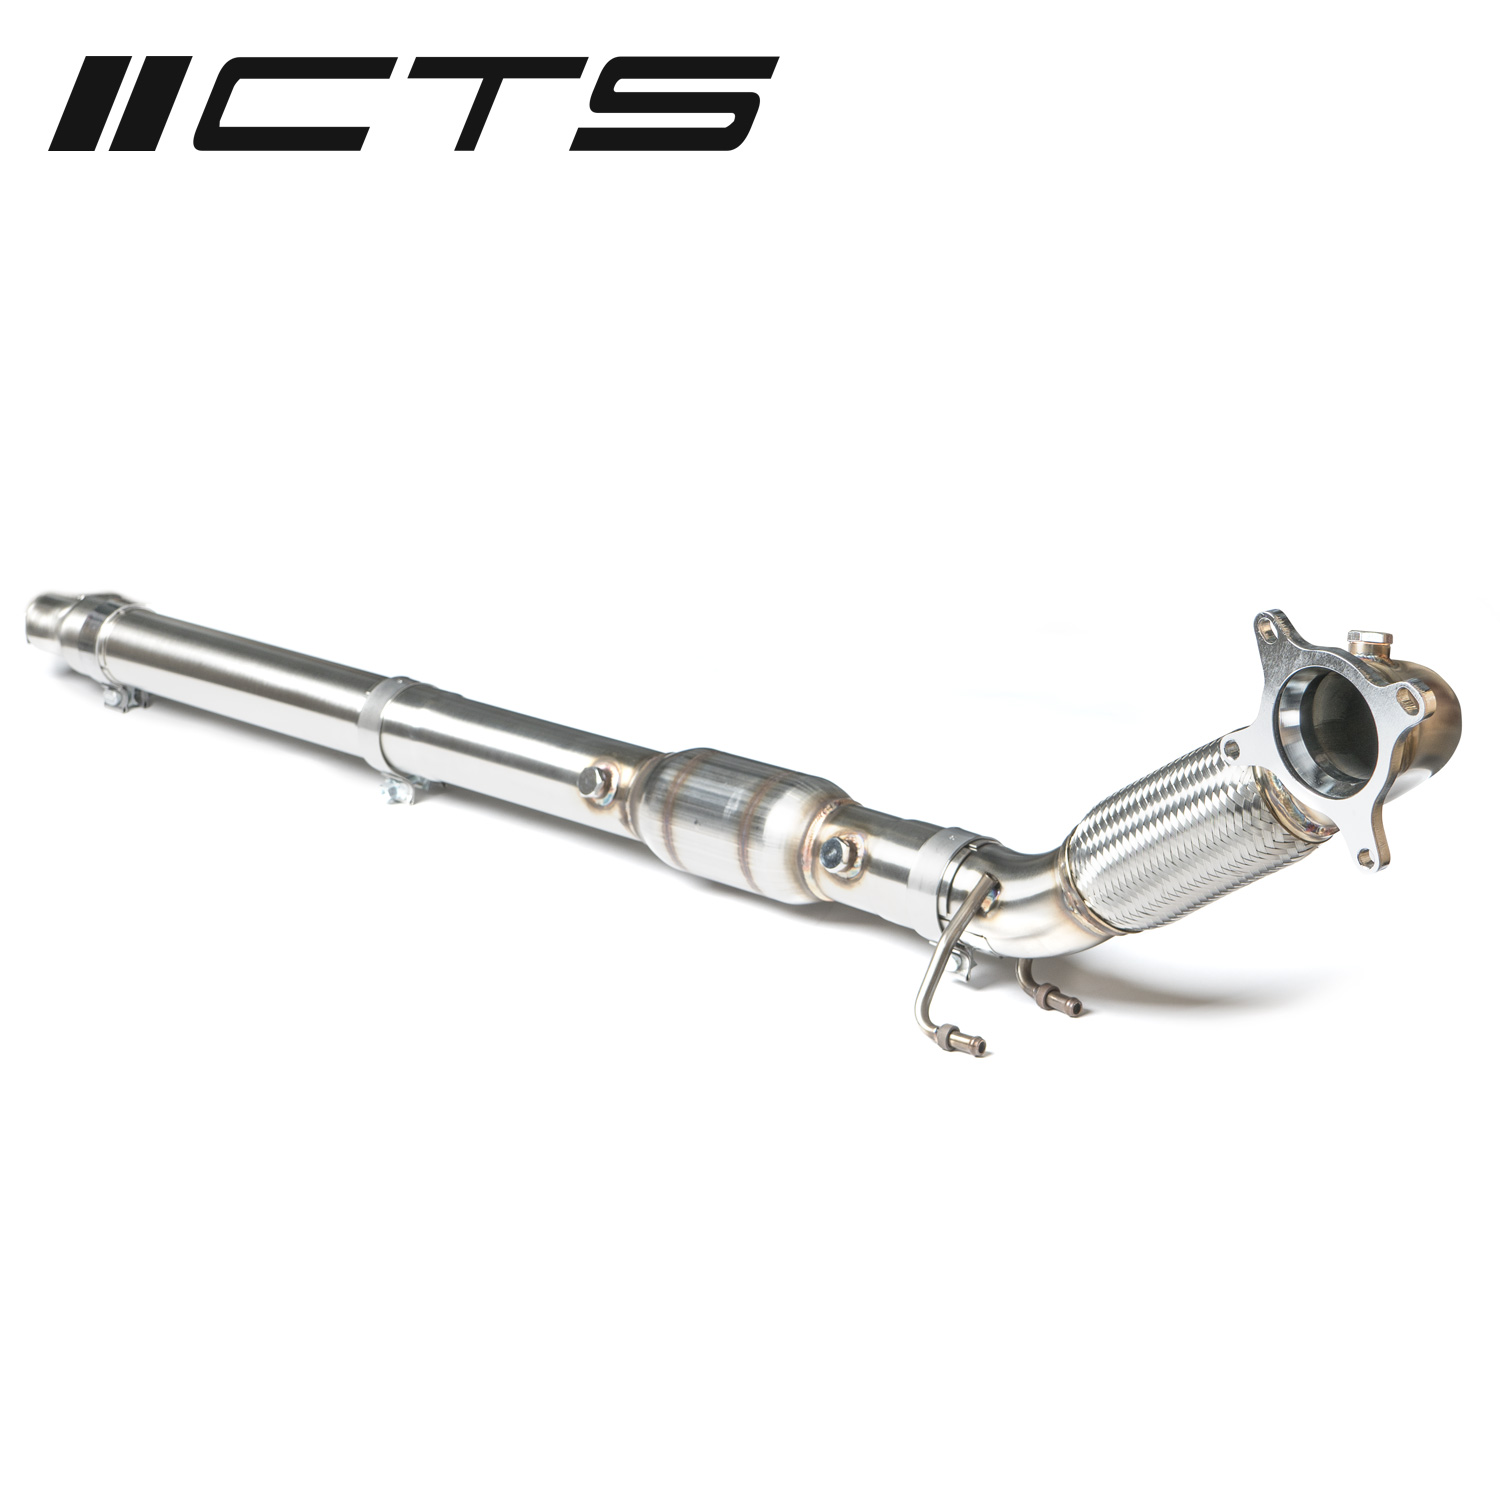 Cts Turbo Audi Vw 2 0t Fwd Exhaust Downpipe With High Flow Cat Mk5